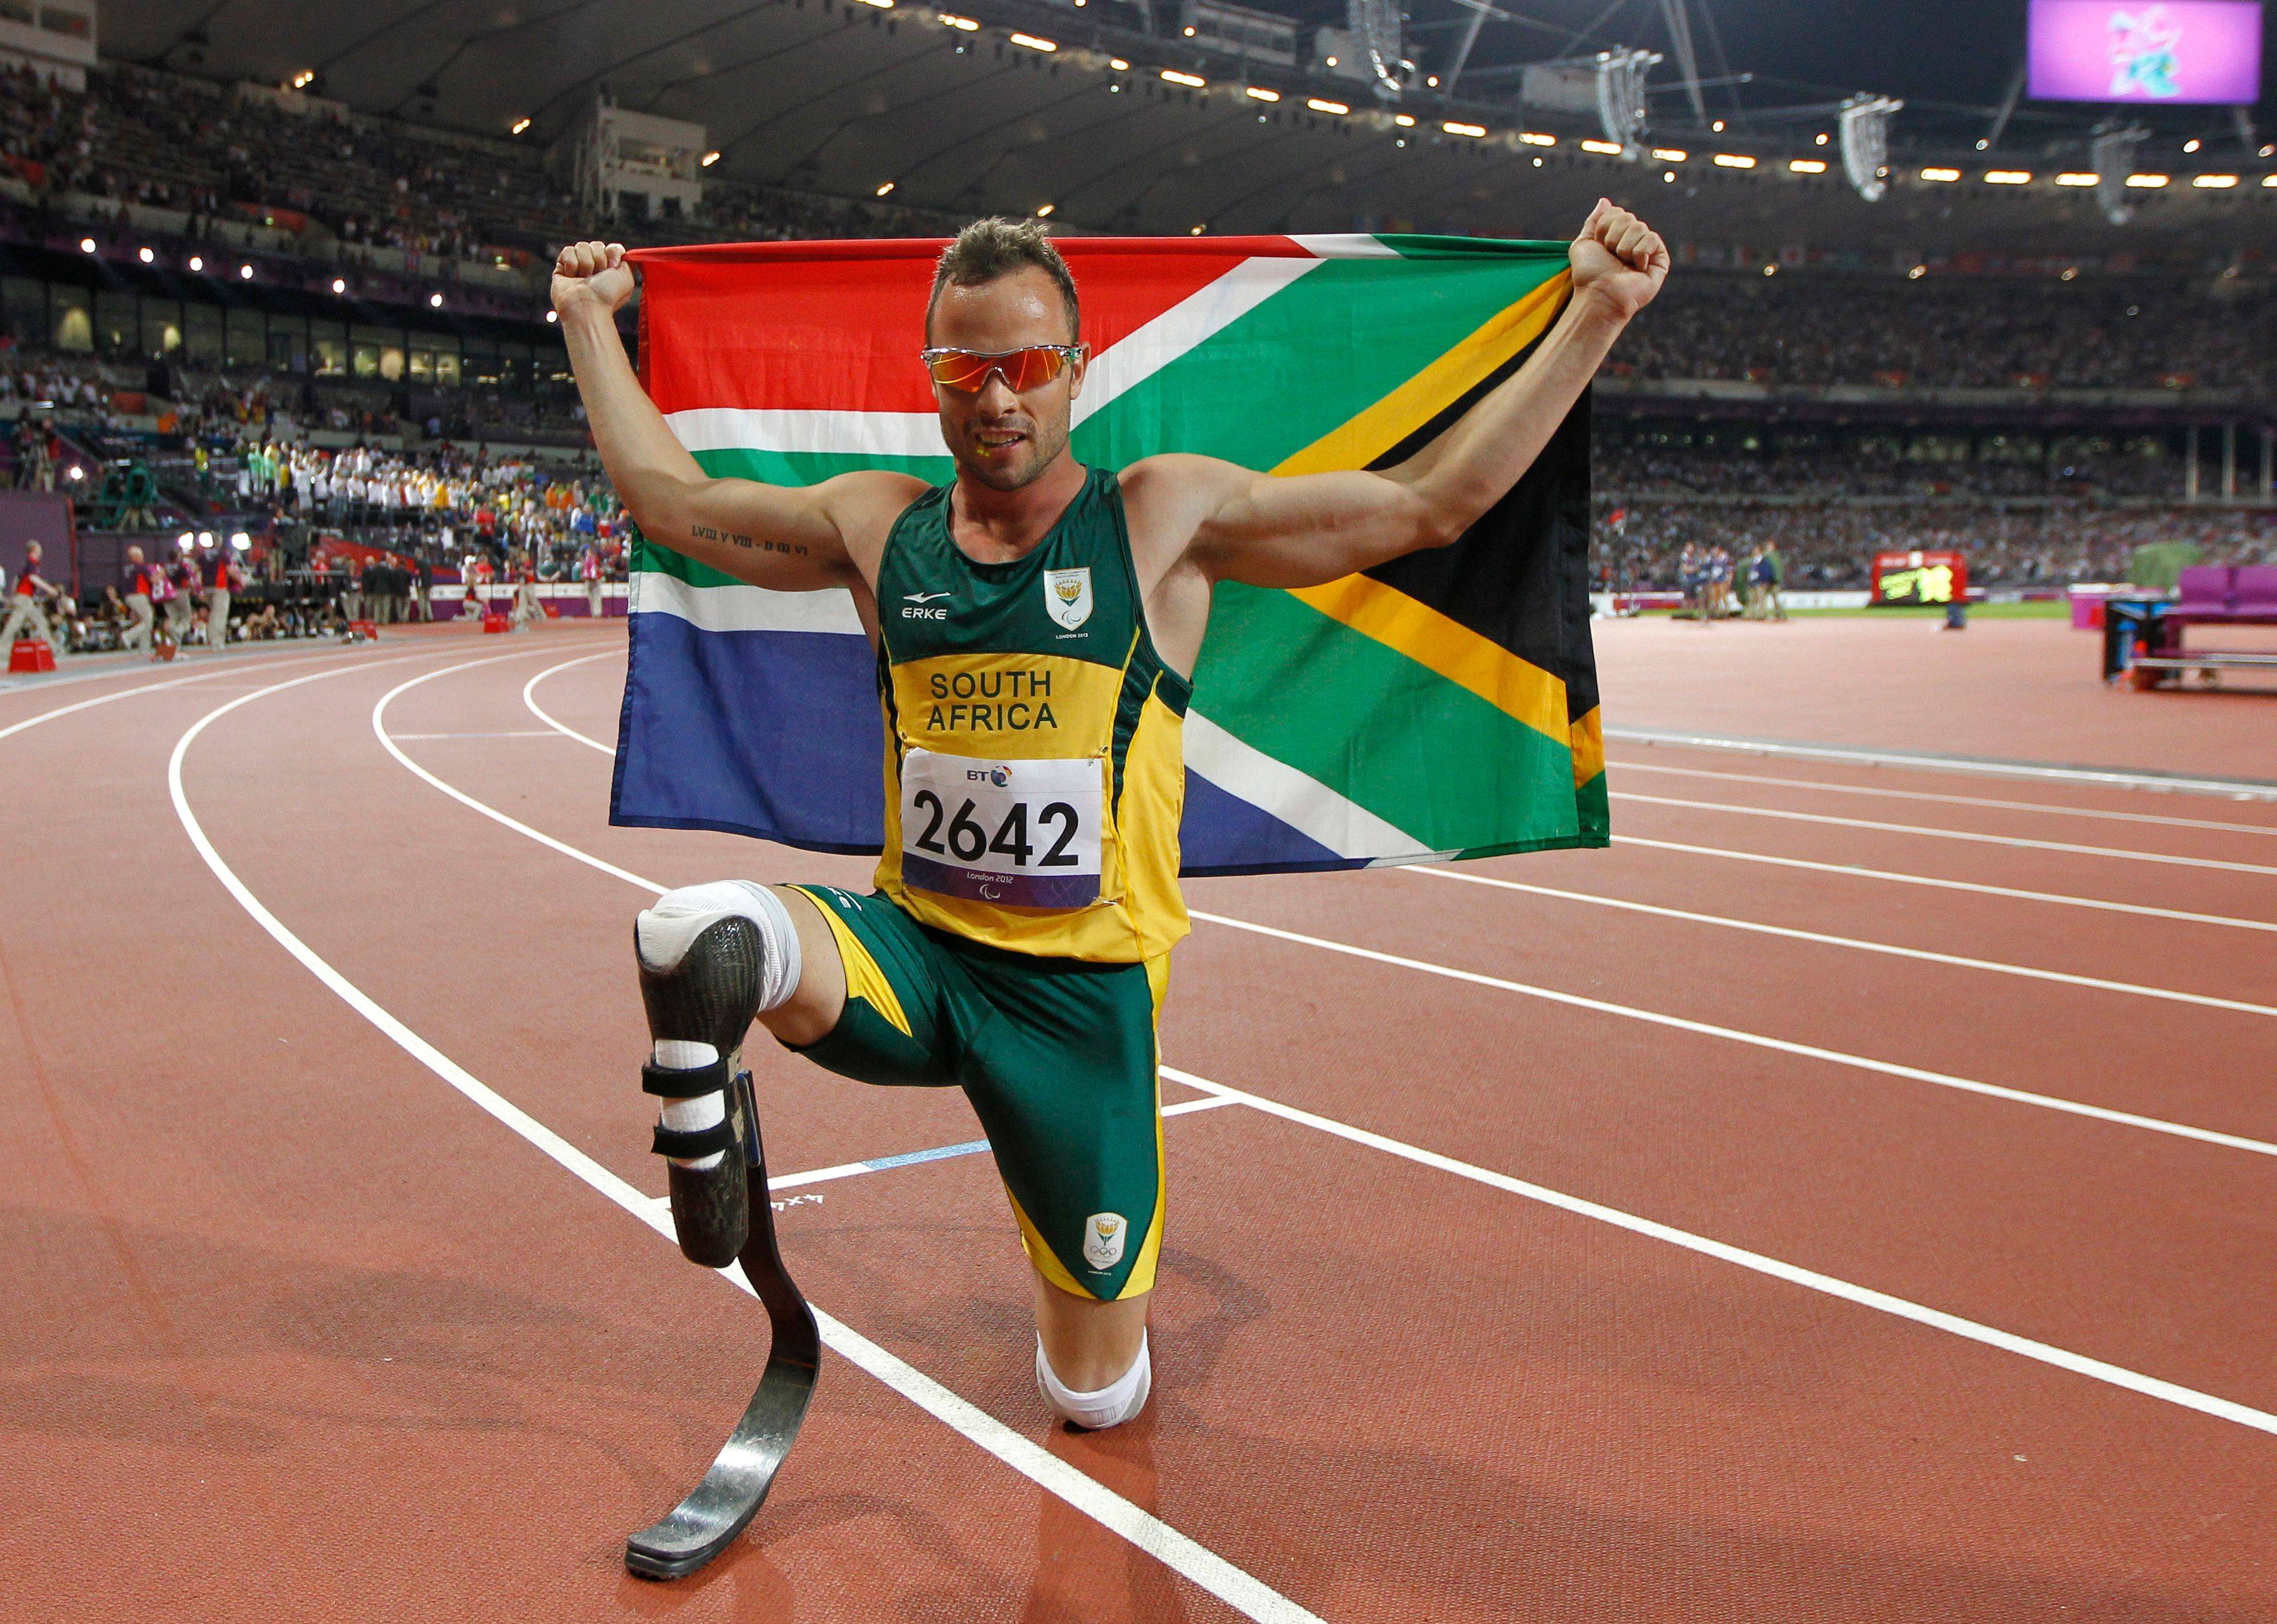 South Africa’s Oscar Pistorius pictured after winning gold in the 2012 Paralympic Games. Photo: AFP